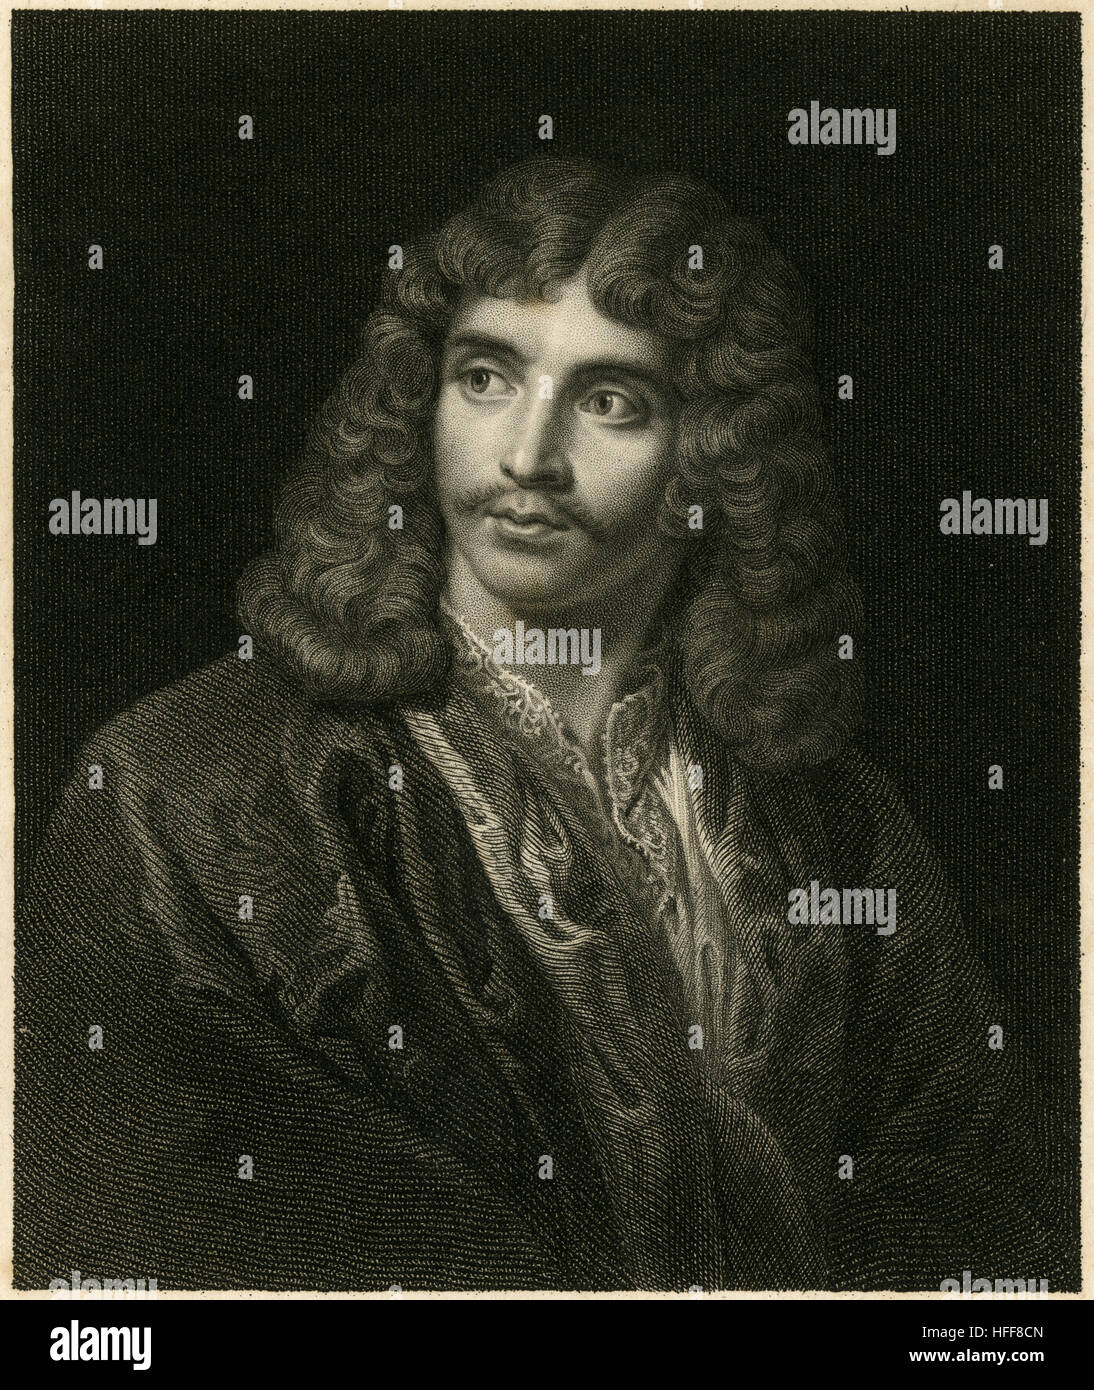 Antique c1840 engraving of Molière. Jean-Baptiste Poquelin, known by his stage name Molière (1622-1673), was a French playwright and actor who is considered to be one of the greatest masters of comedy in Western literature. SOURCE: ORIGINAL ENGRAVING. Stock Photo